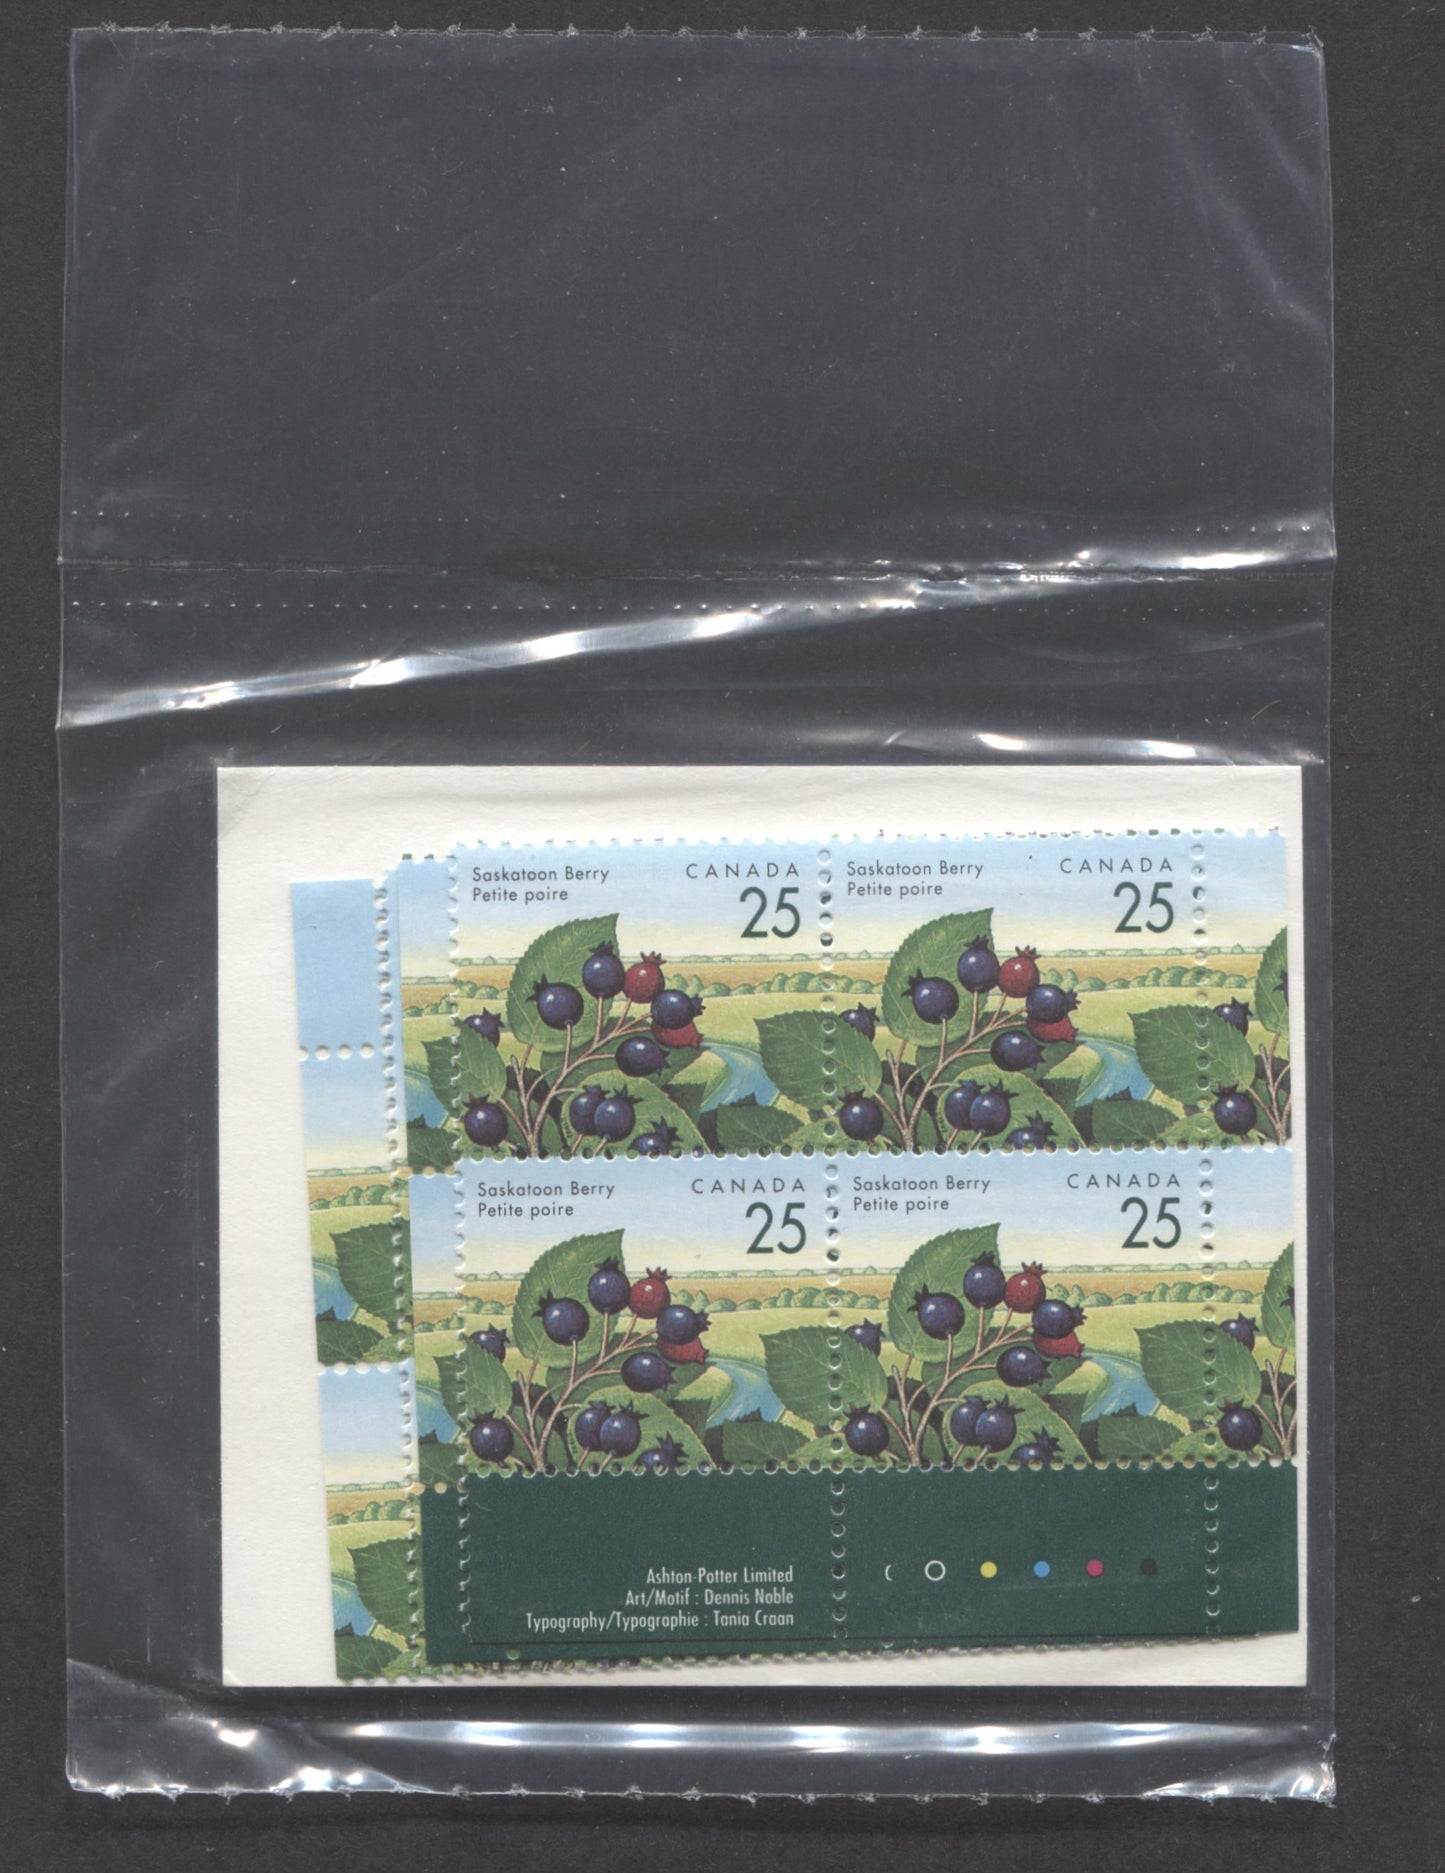 Lot 26 Canada #1355 25c Multicoloured 1992 - 1998 Edible Berries Definitive Issue, Canada Post Sealed Pack of Inscription Blocks, Ashton Potter Canada Printing On DF CPP Paper, With DF Type 5B Insert Card, VFNH, Unitrade Cat. $17.5